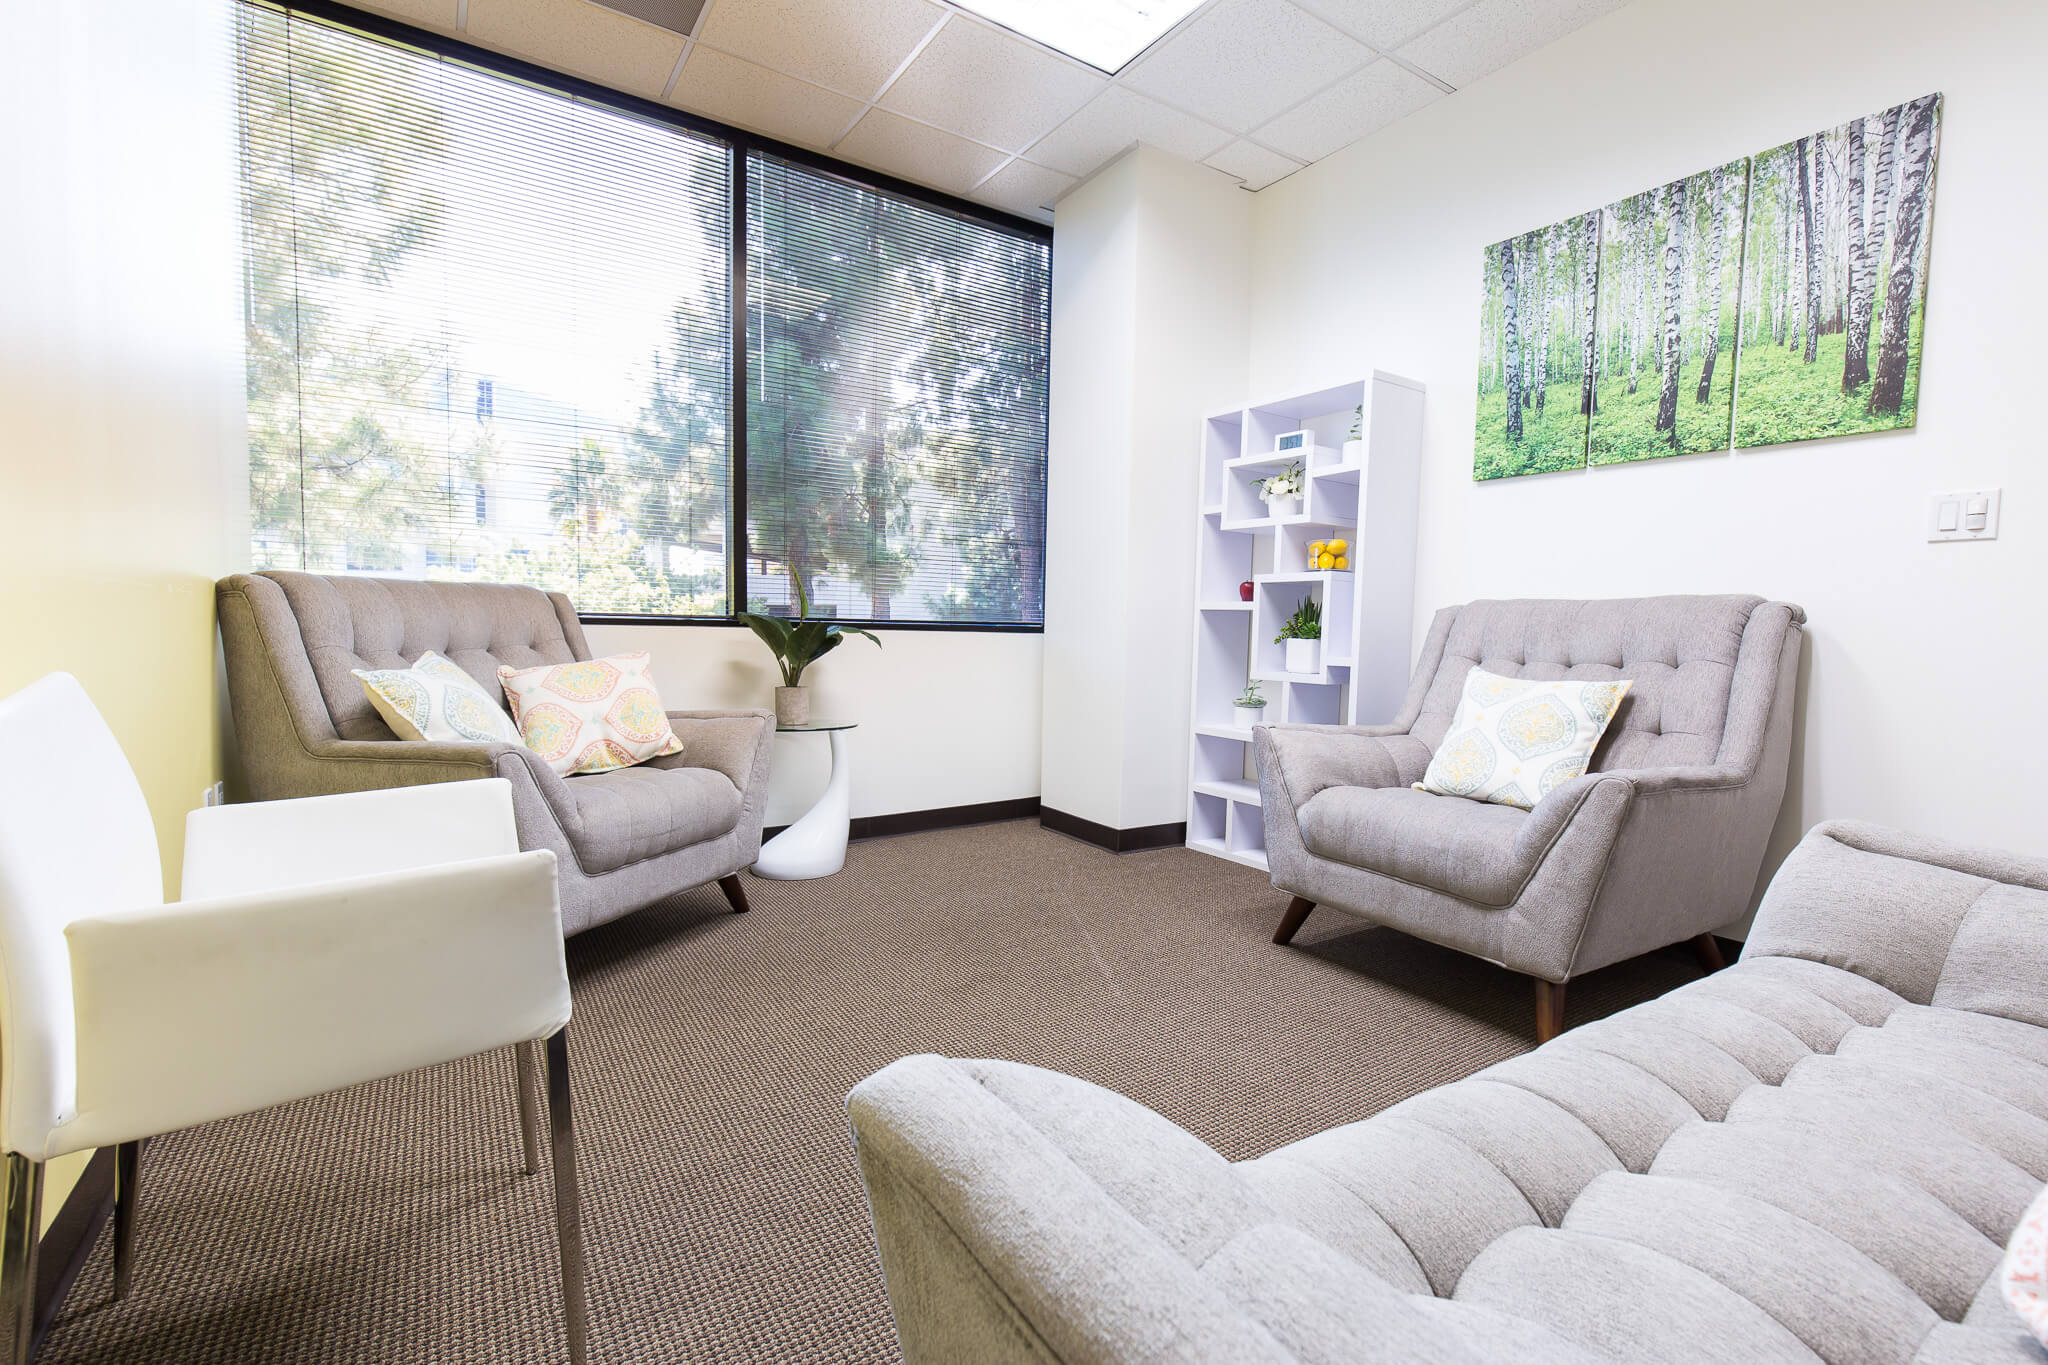 Group therapy room at Woodland Hills